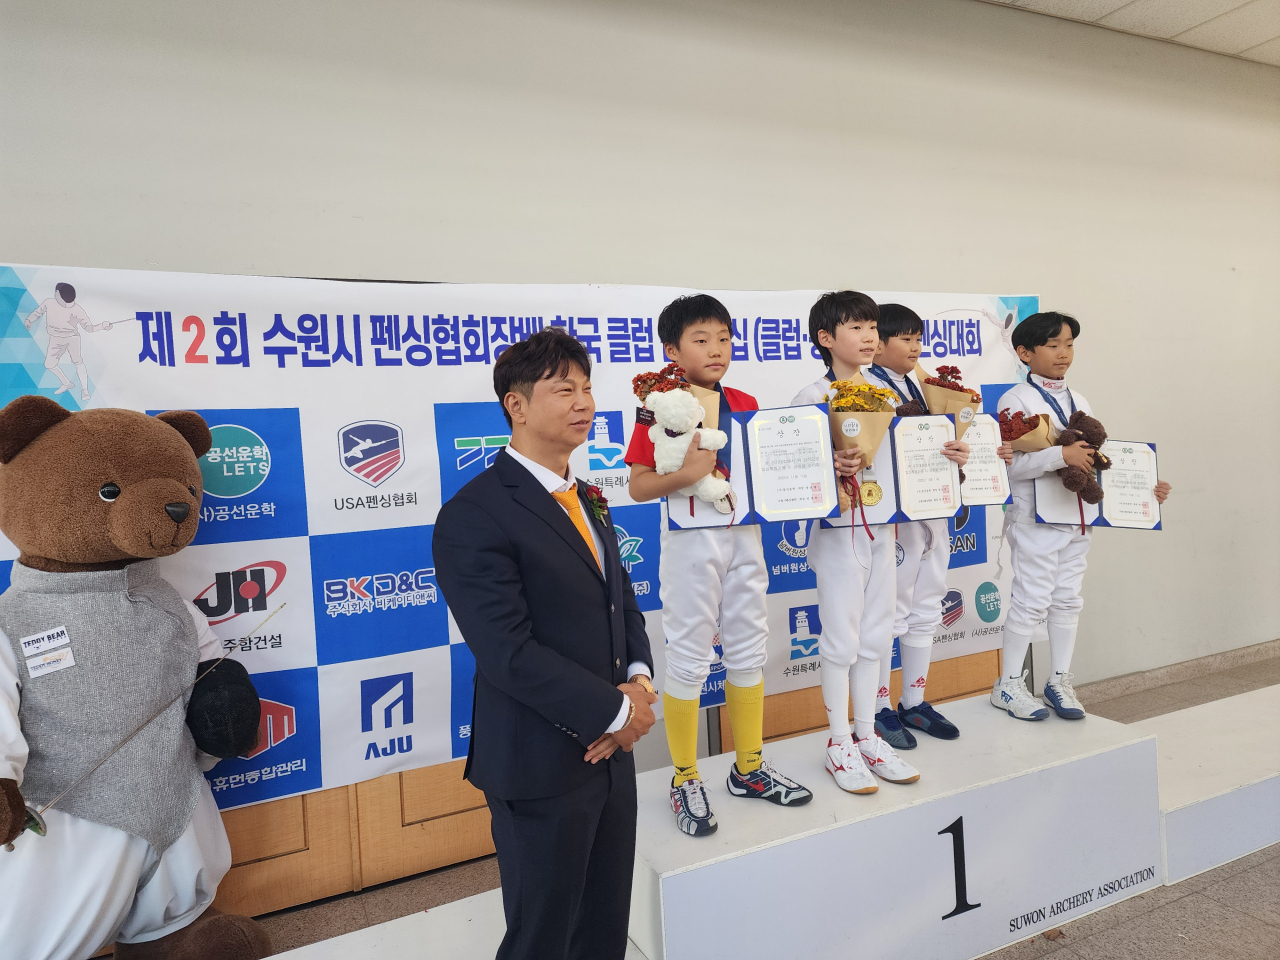 An Jae-cheon(left), president of BK D&C, poses with the top contestants in the elementary school division of the Korea Club Championship – Fencing, that took place Nov.11-12 in this file photo. (Suwon Fencing Association)